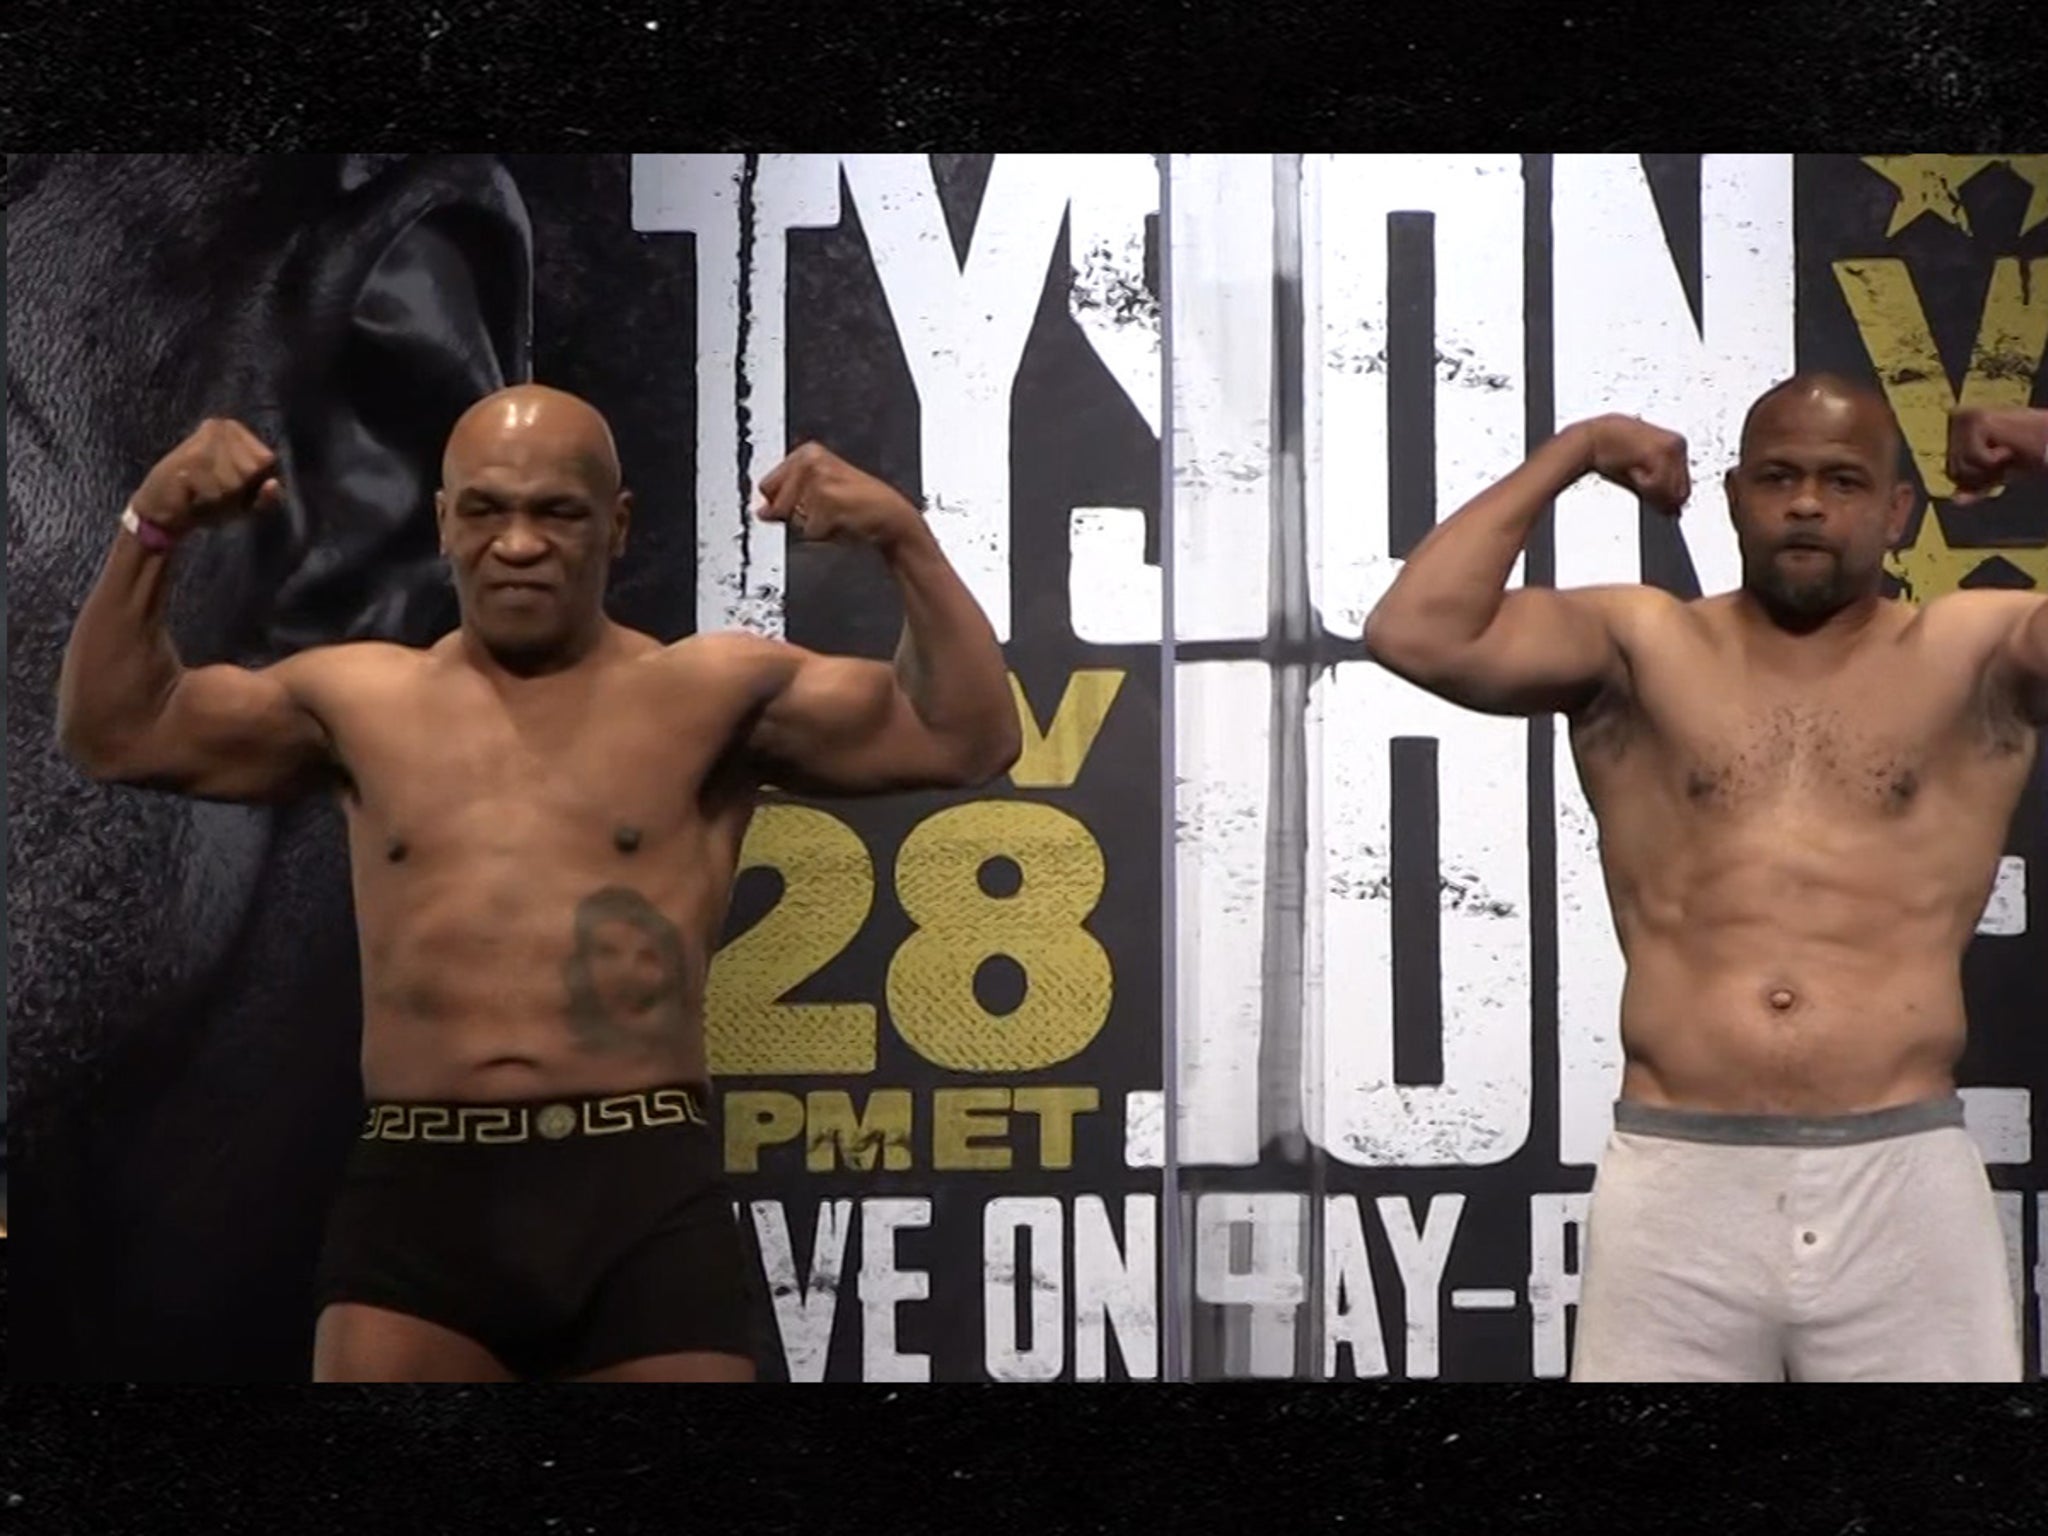 Mike Tyson Strips Down and Flexes at Weigh-In for Roy Jones Jr Fight, Ripped at 54!